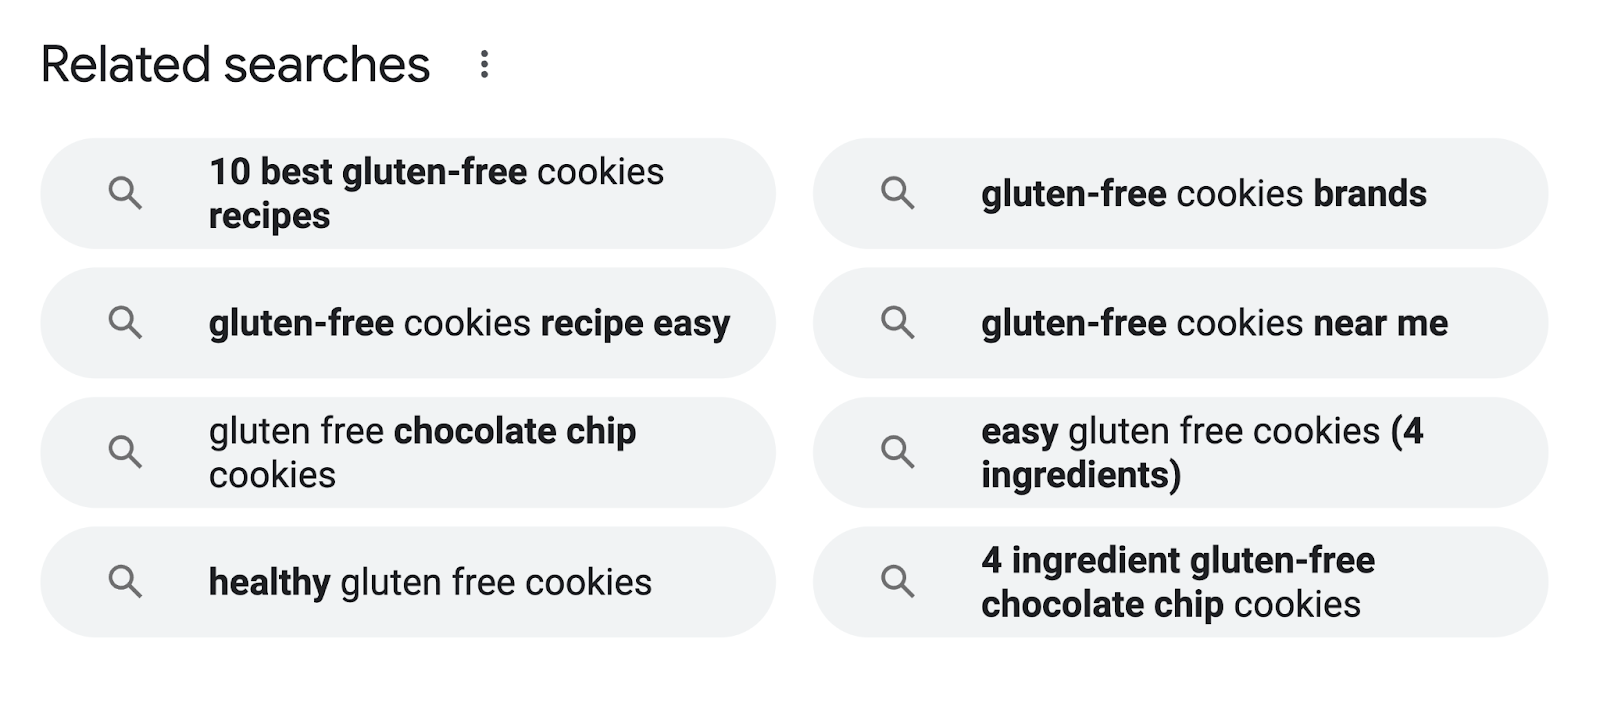 Google’s “Related searches” section for "gluten free cookies"